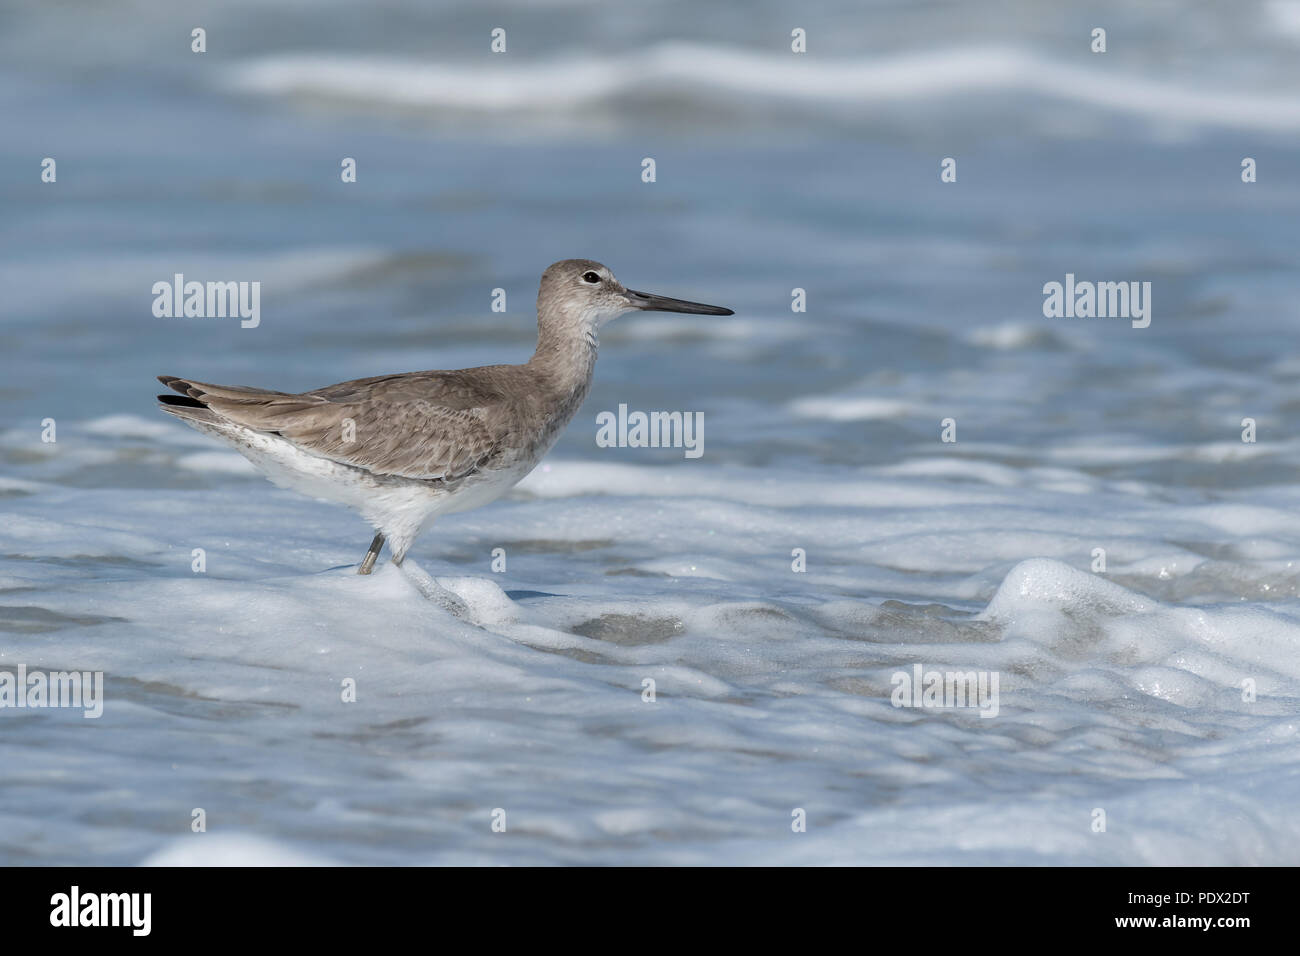 A Willet (Tringa semipalmata) keeps an eye on the sky while looking for food in the foamy surf on the Gulf shores of Central Florida. Stock Photo